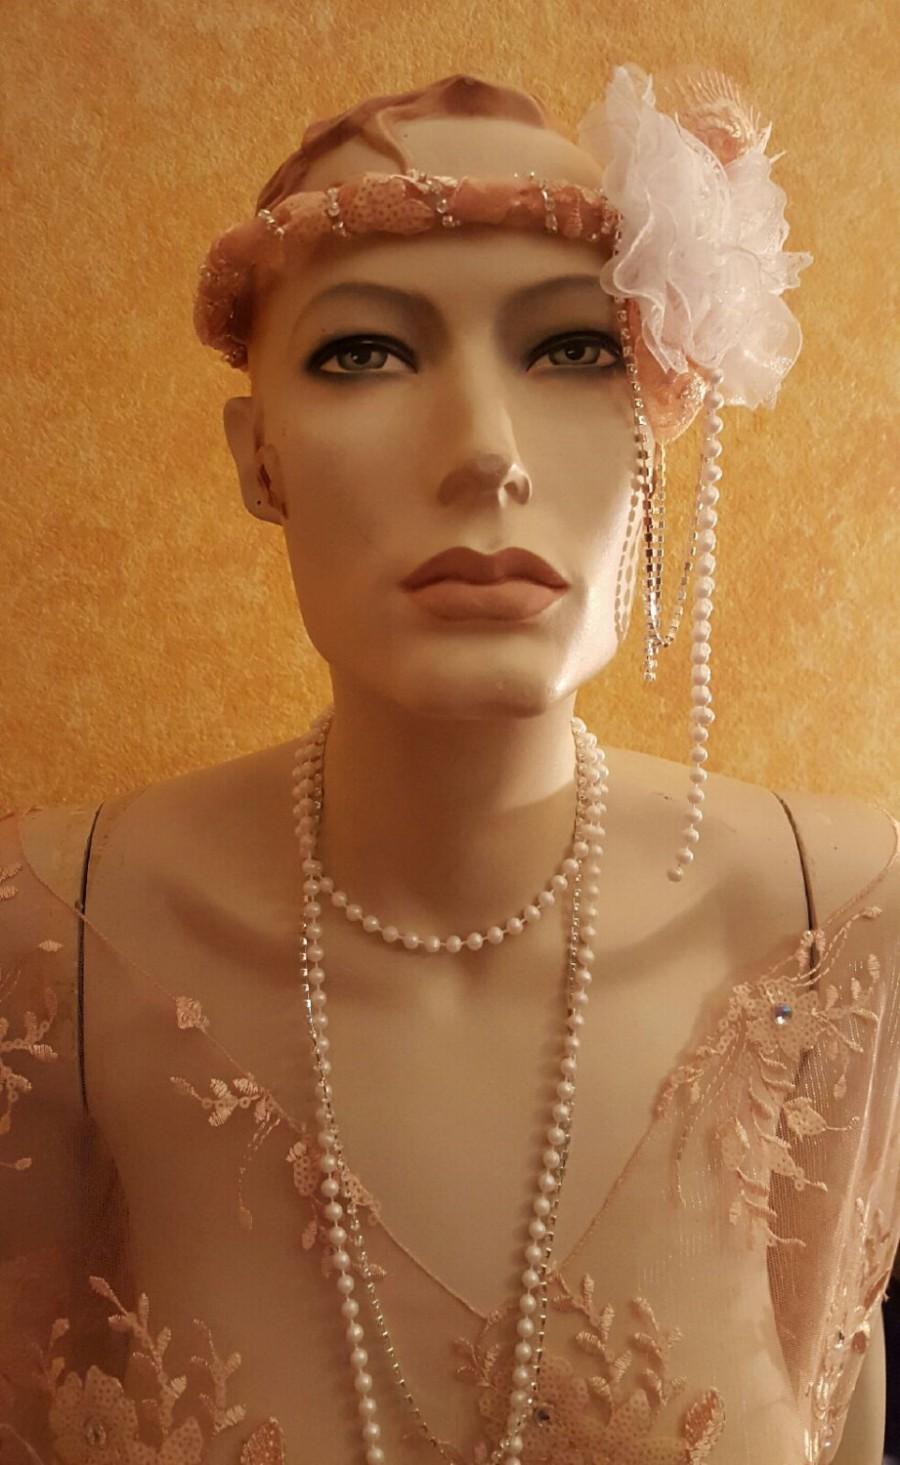 Hochzeit - Blush Peach & White Embroidered Lace Pearl Crystal Sequin Flapper Gatsby 20's Style Headpiece Headband Bridal Wedding Party Costume